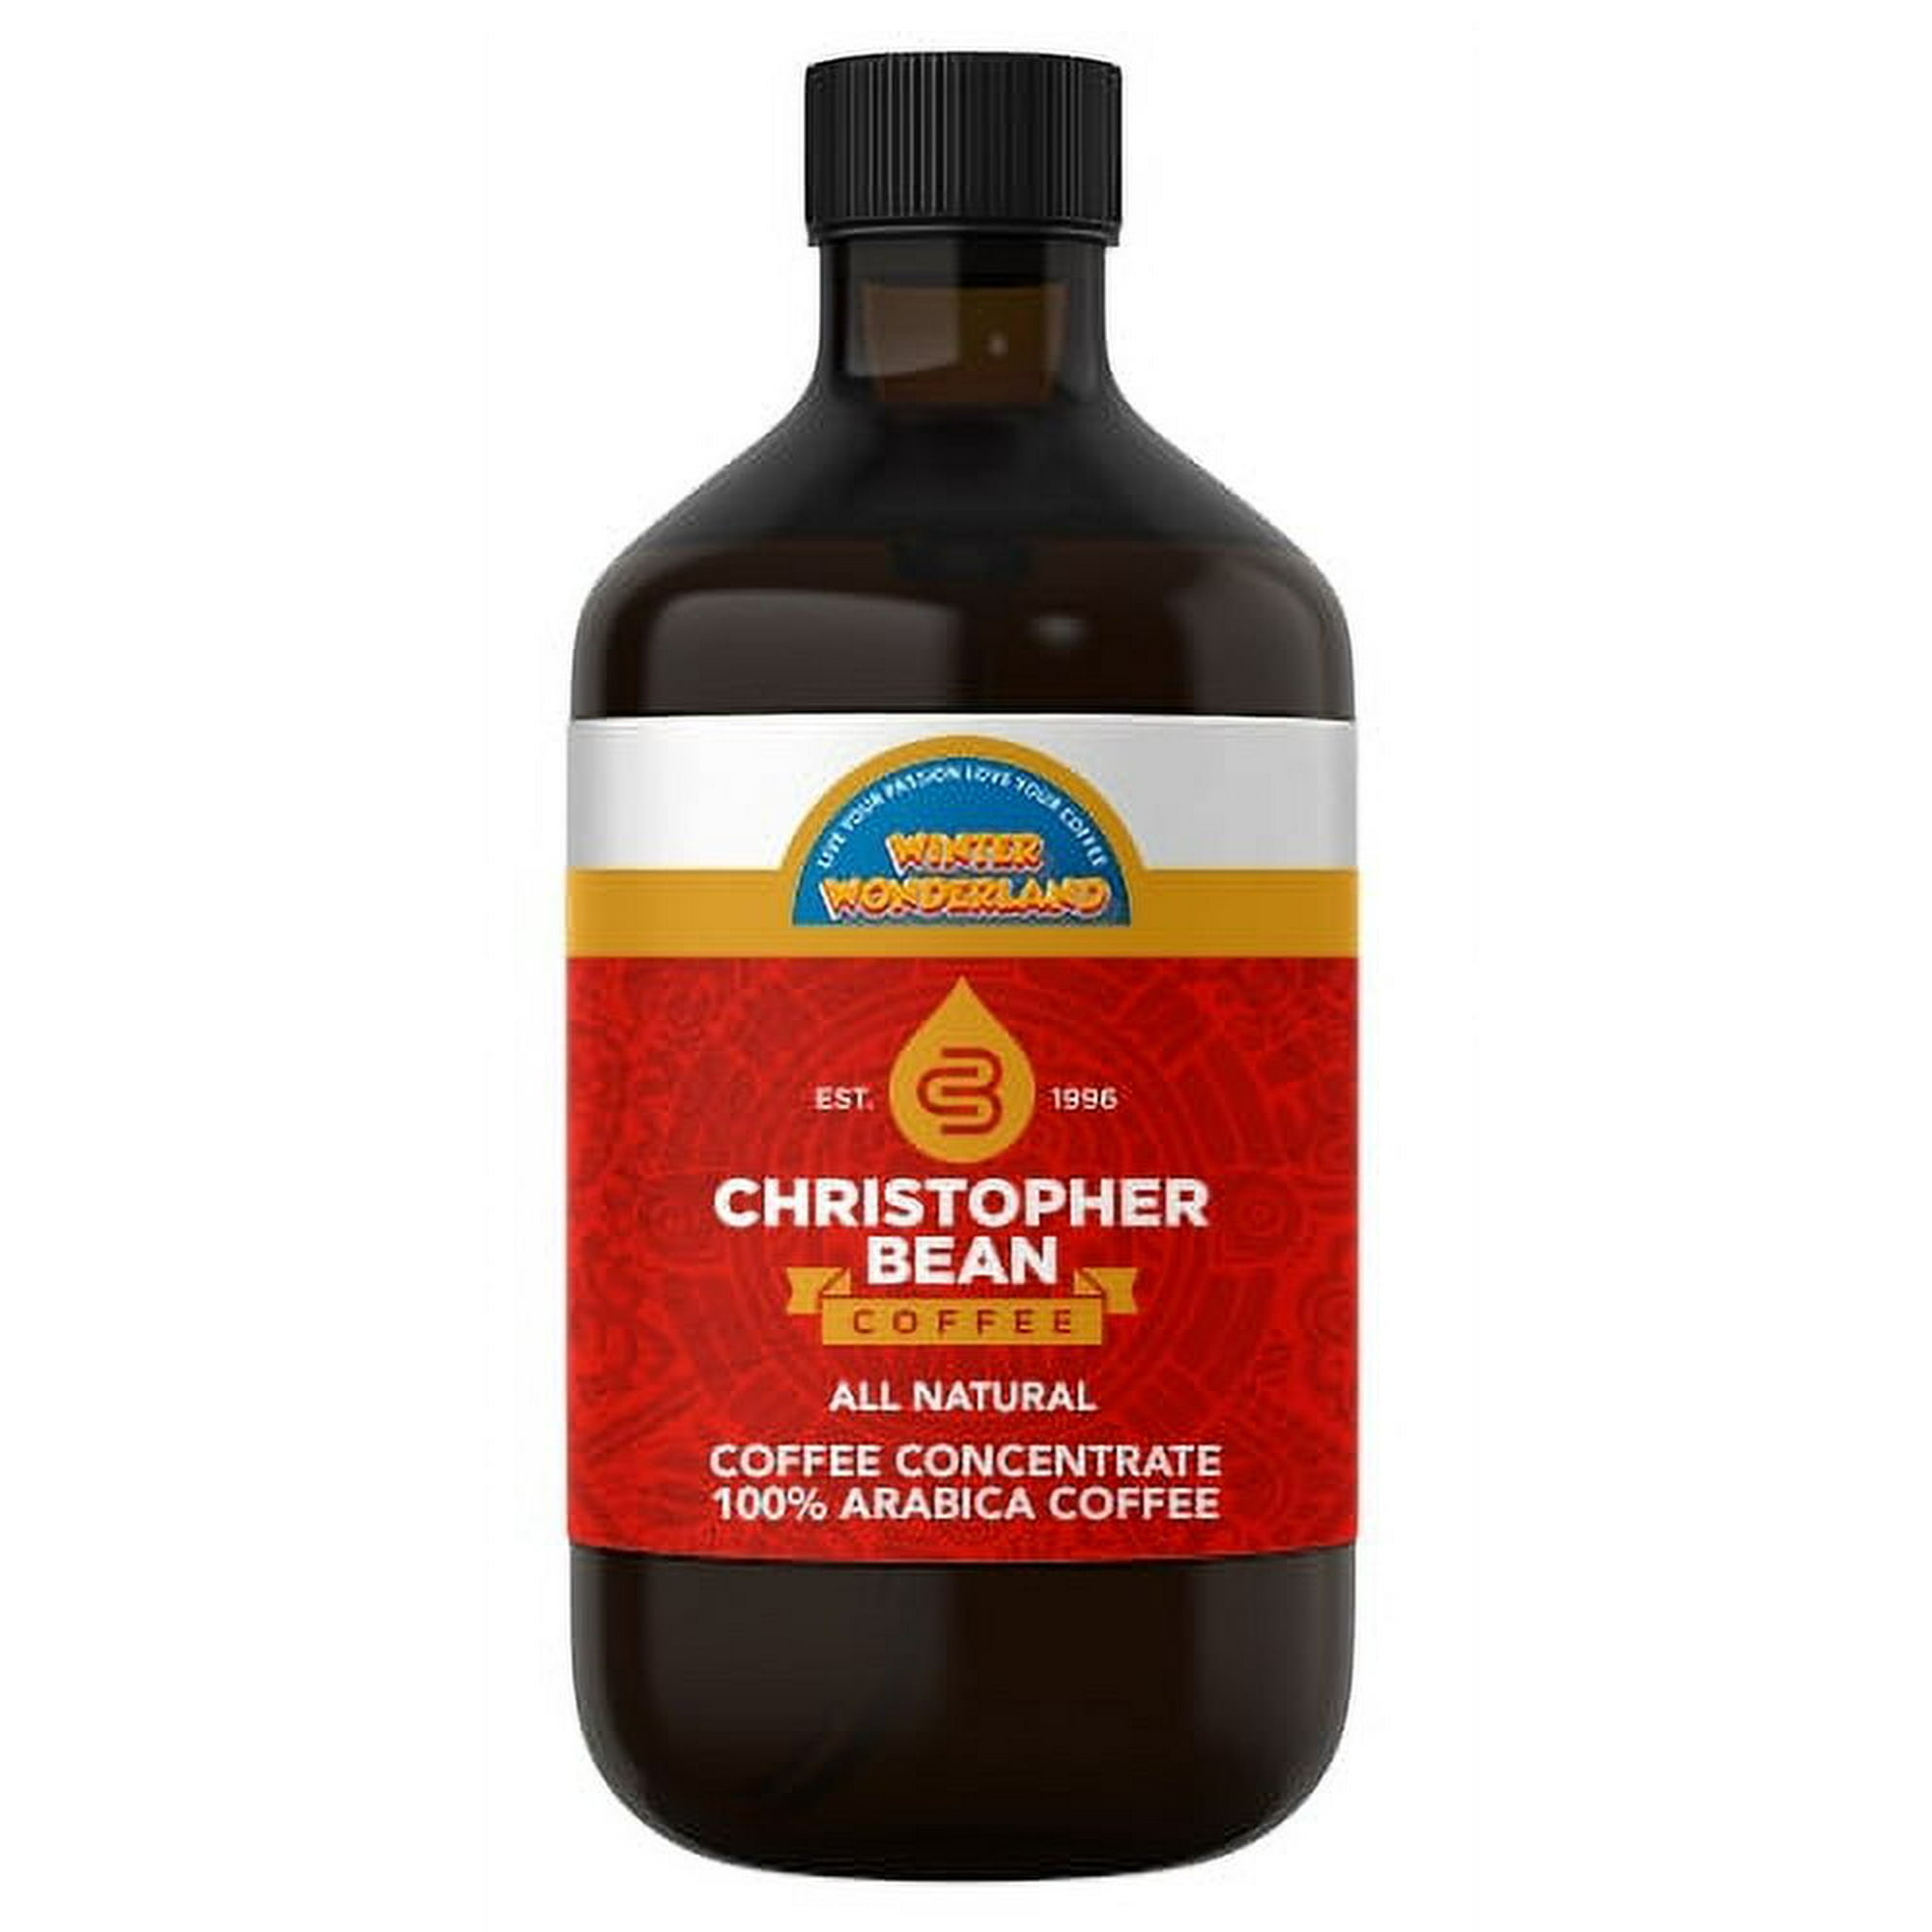 Caramel Cold Brew, Iced Coffee, Hot Coffee Christopher Bean Liquid Java (8 Ounce bottle) Makes 24-31 Cups